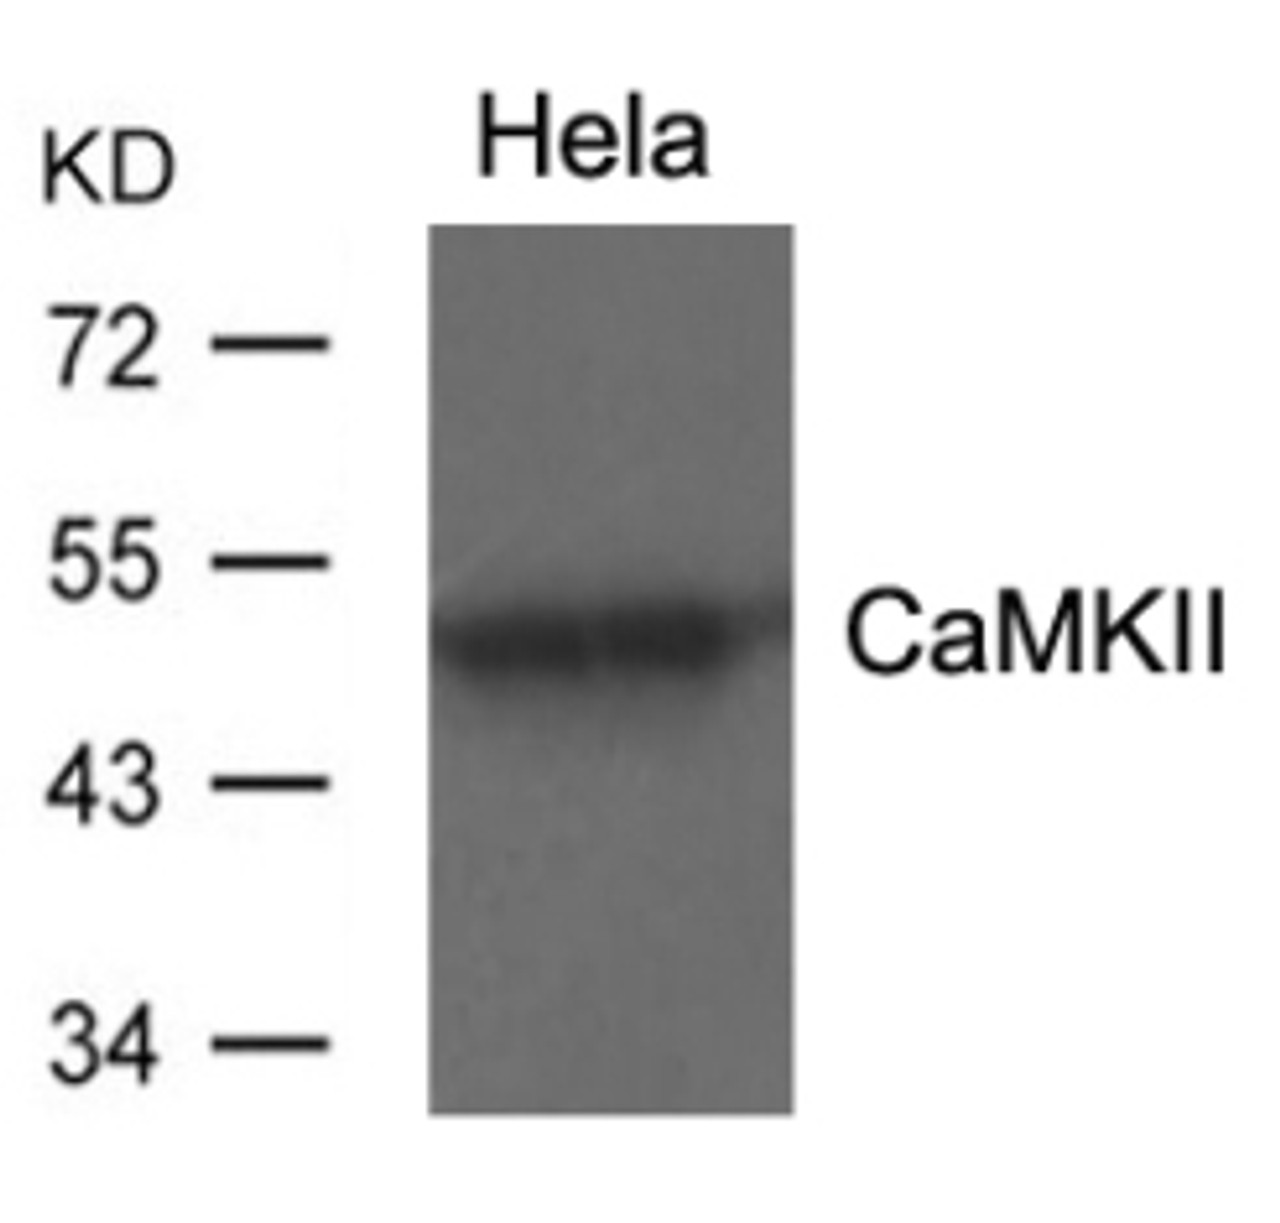 Western blot analysis of lysed extracts from HeLa using CaMKII (Ab-286) .